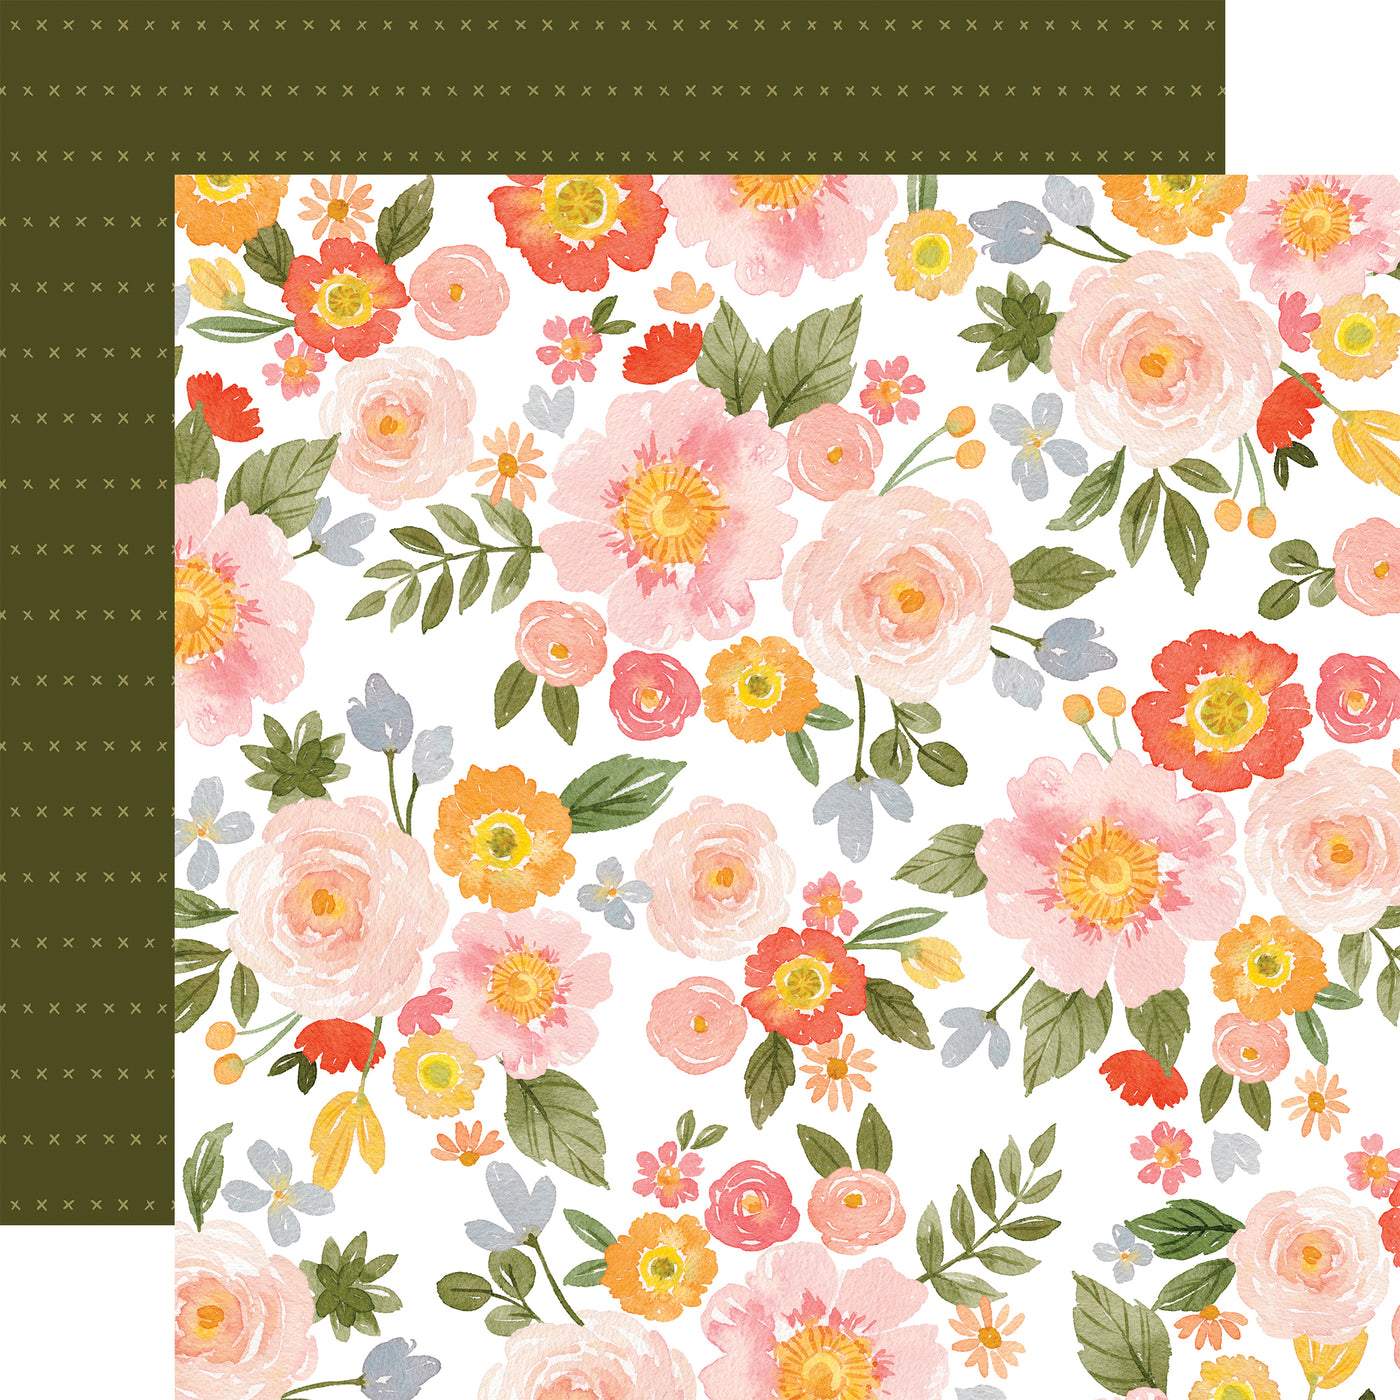 The front side of this paper has a beautiful floral pattern in shades of pink, maroon, yellow, and periwinkle. The reverse side is green with horizontal rows of x's.